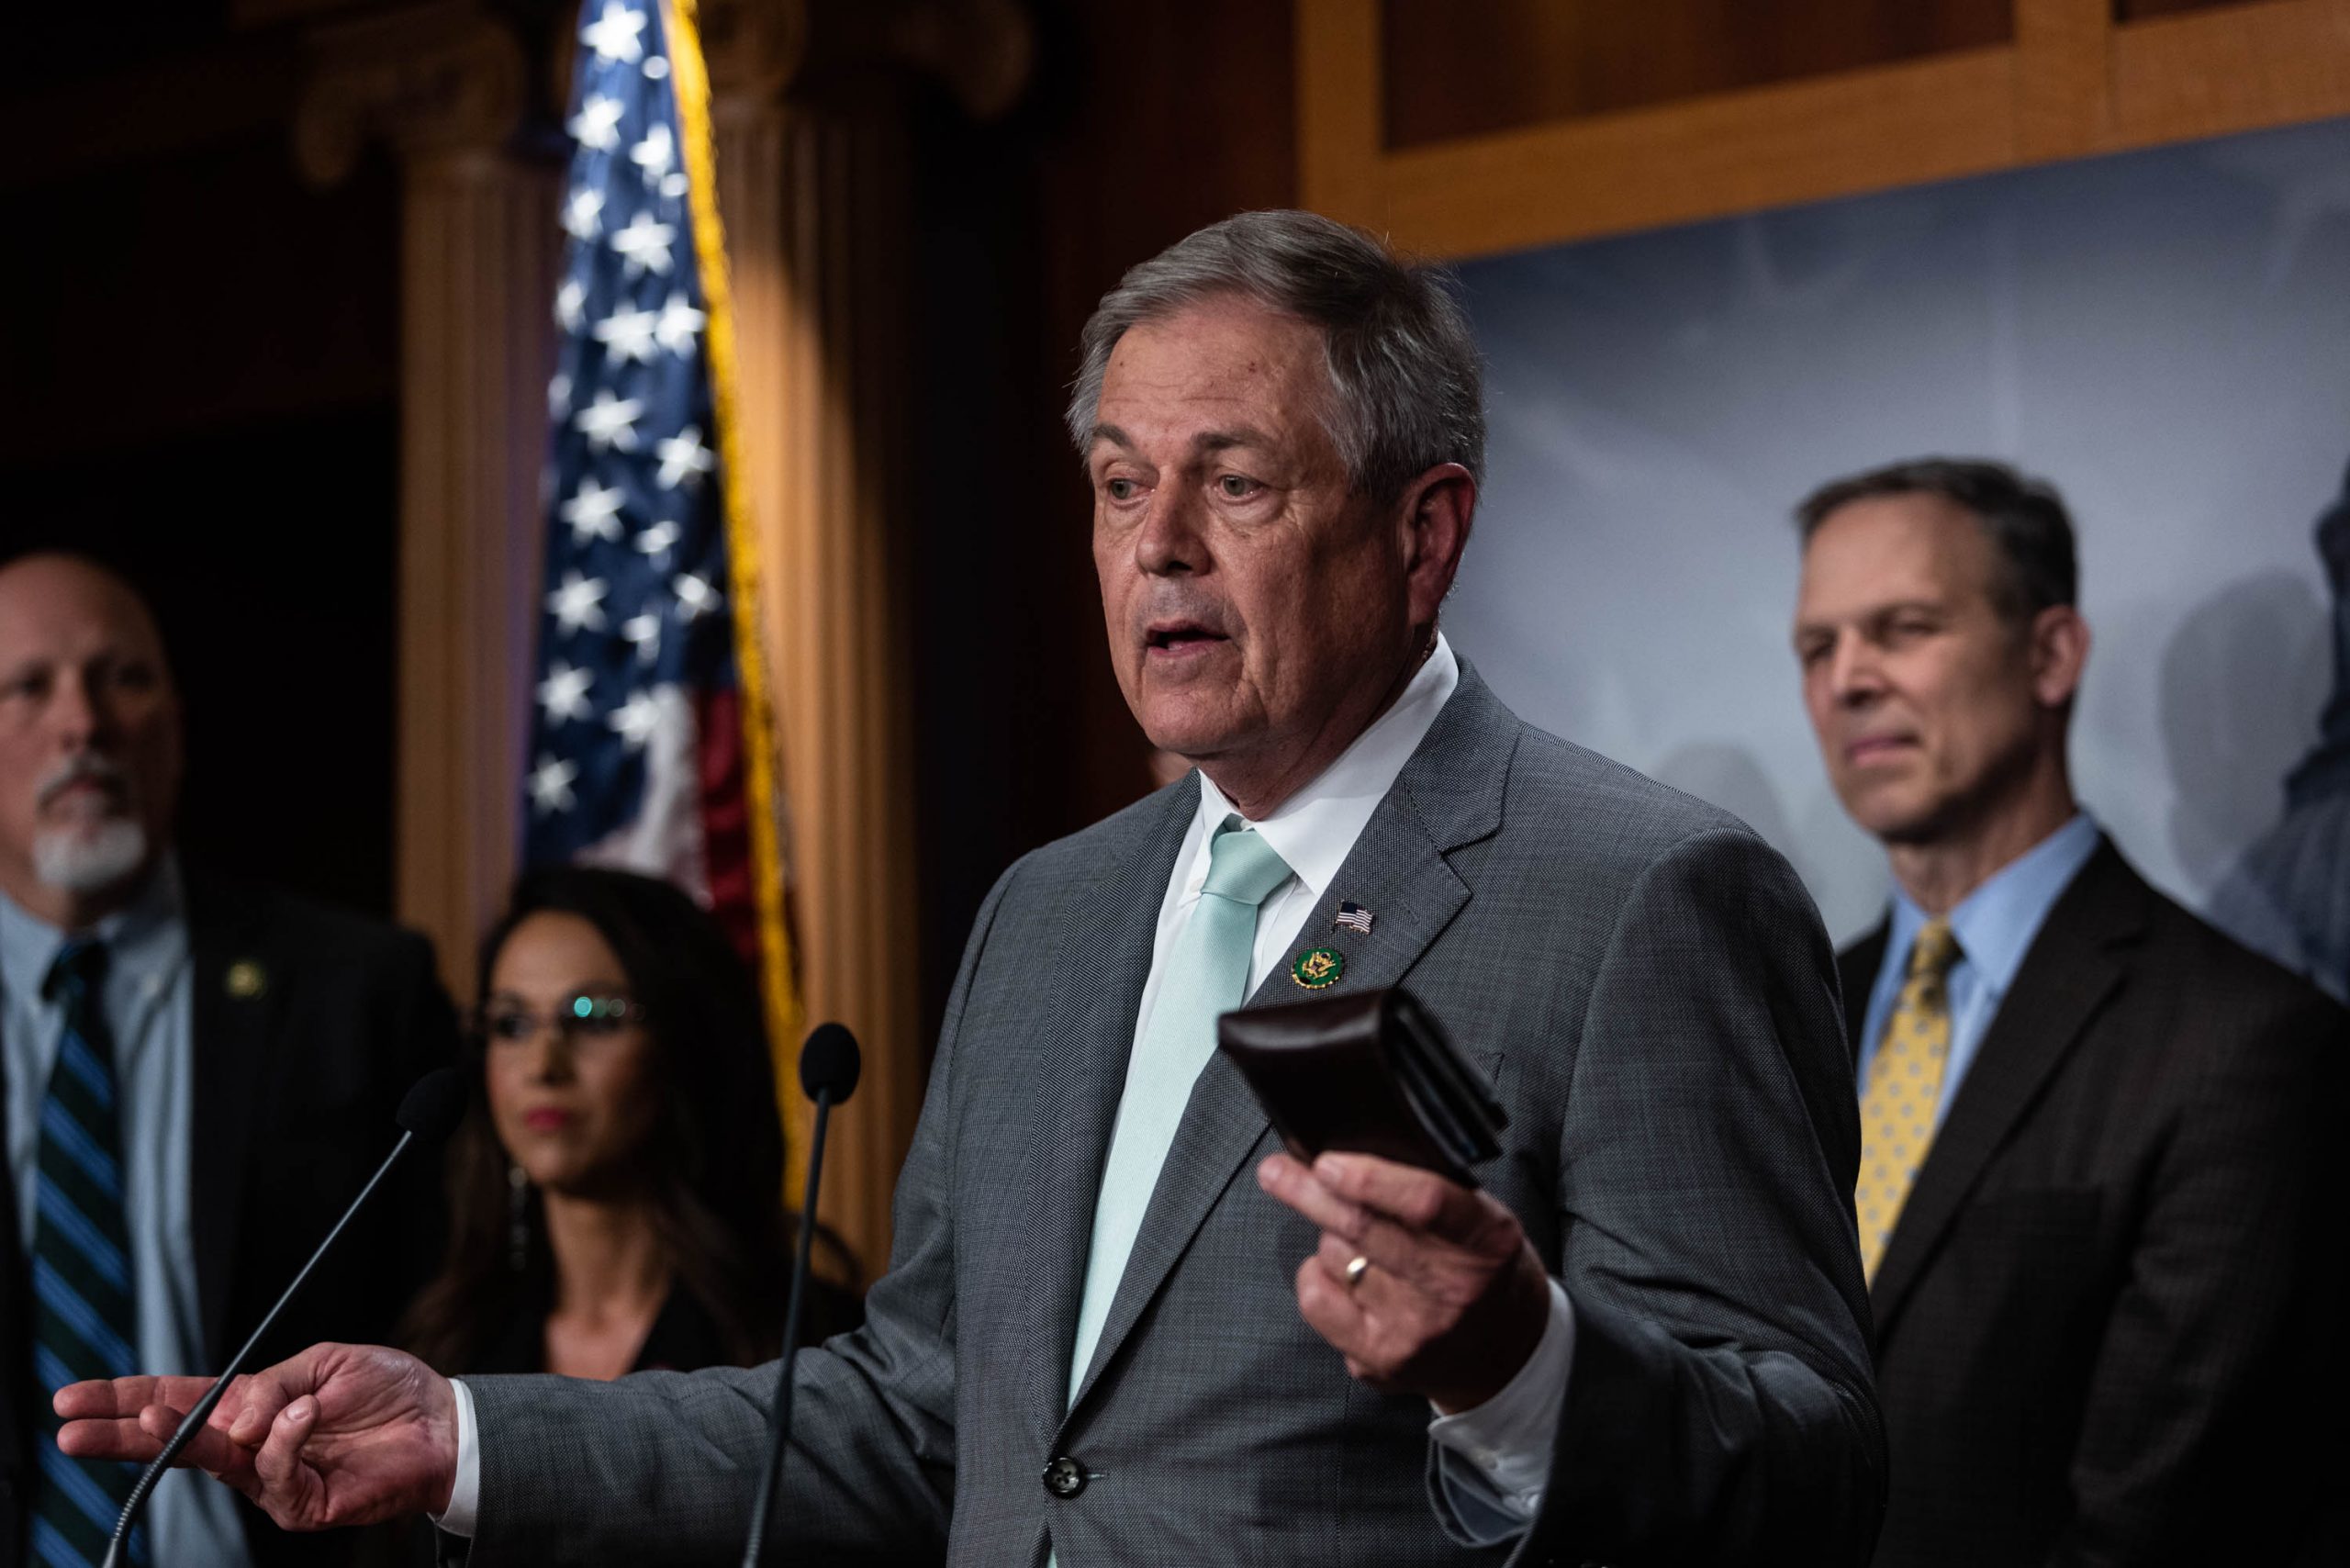 Rep. Ralph Norman (R-SC) holds his wallet while speaking at a news conference with senators and members of the House Freedom Caucus on the debt limit and spending reforms in the Senate studio of the U.S. Capitol on Wednesday, March 22, 2023.